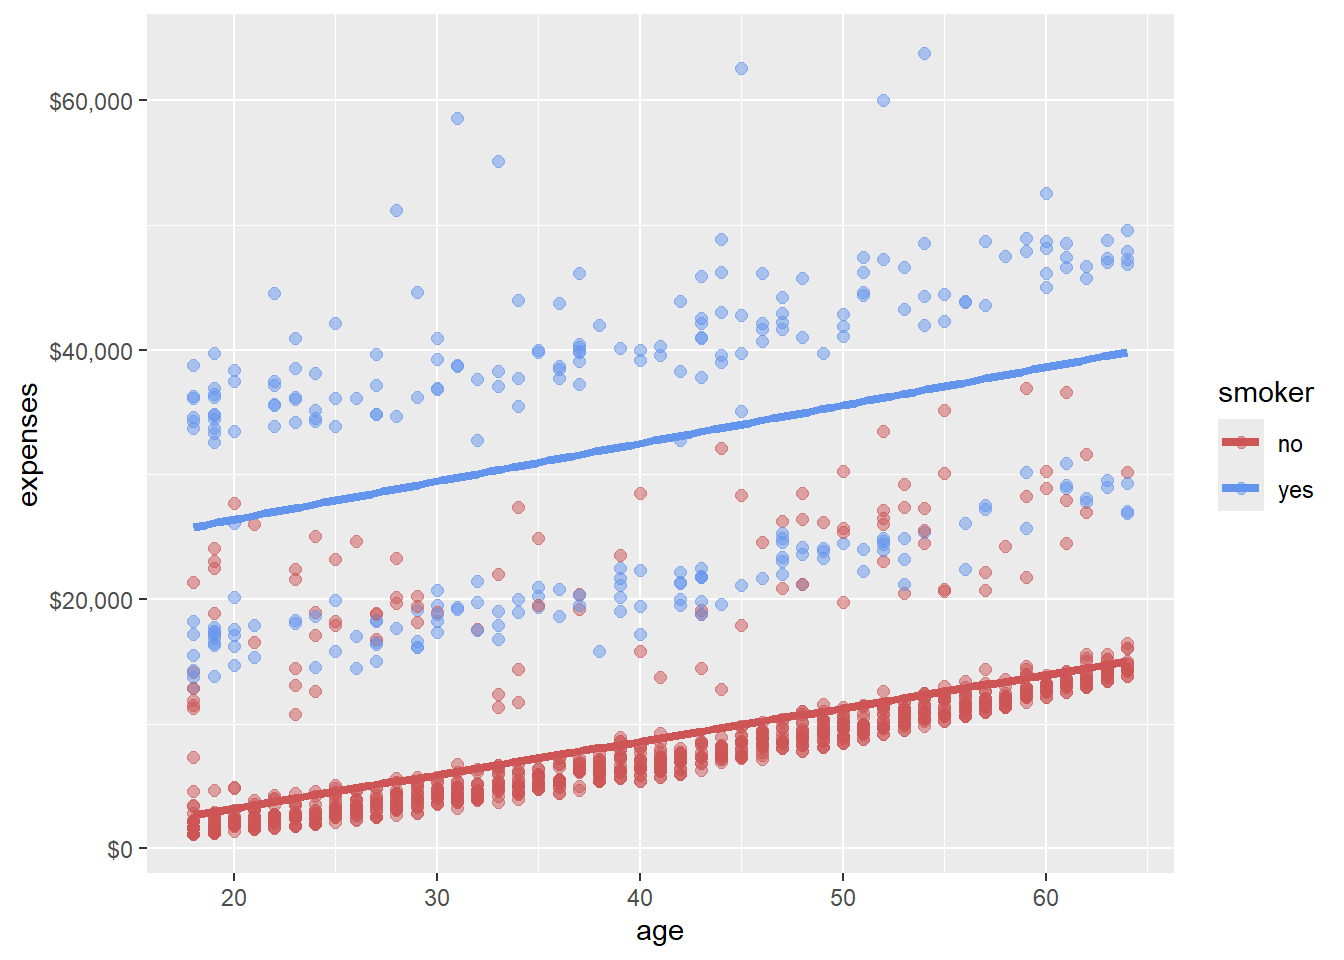 Change colors and axis labels